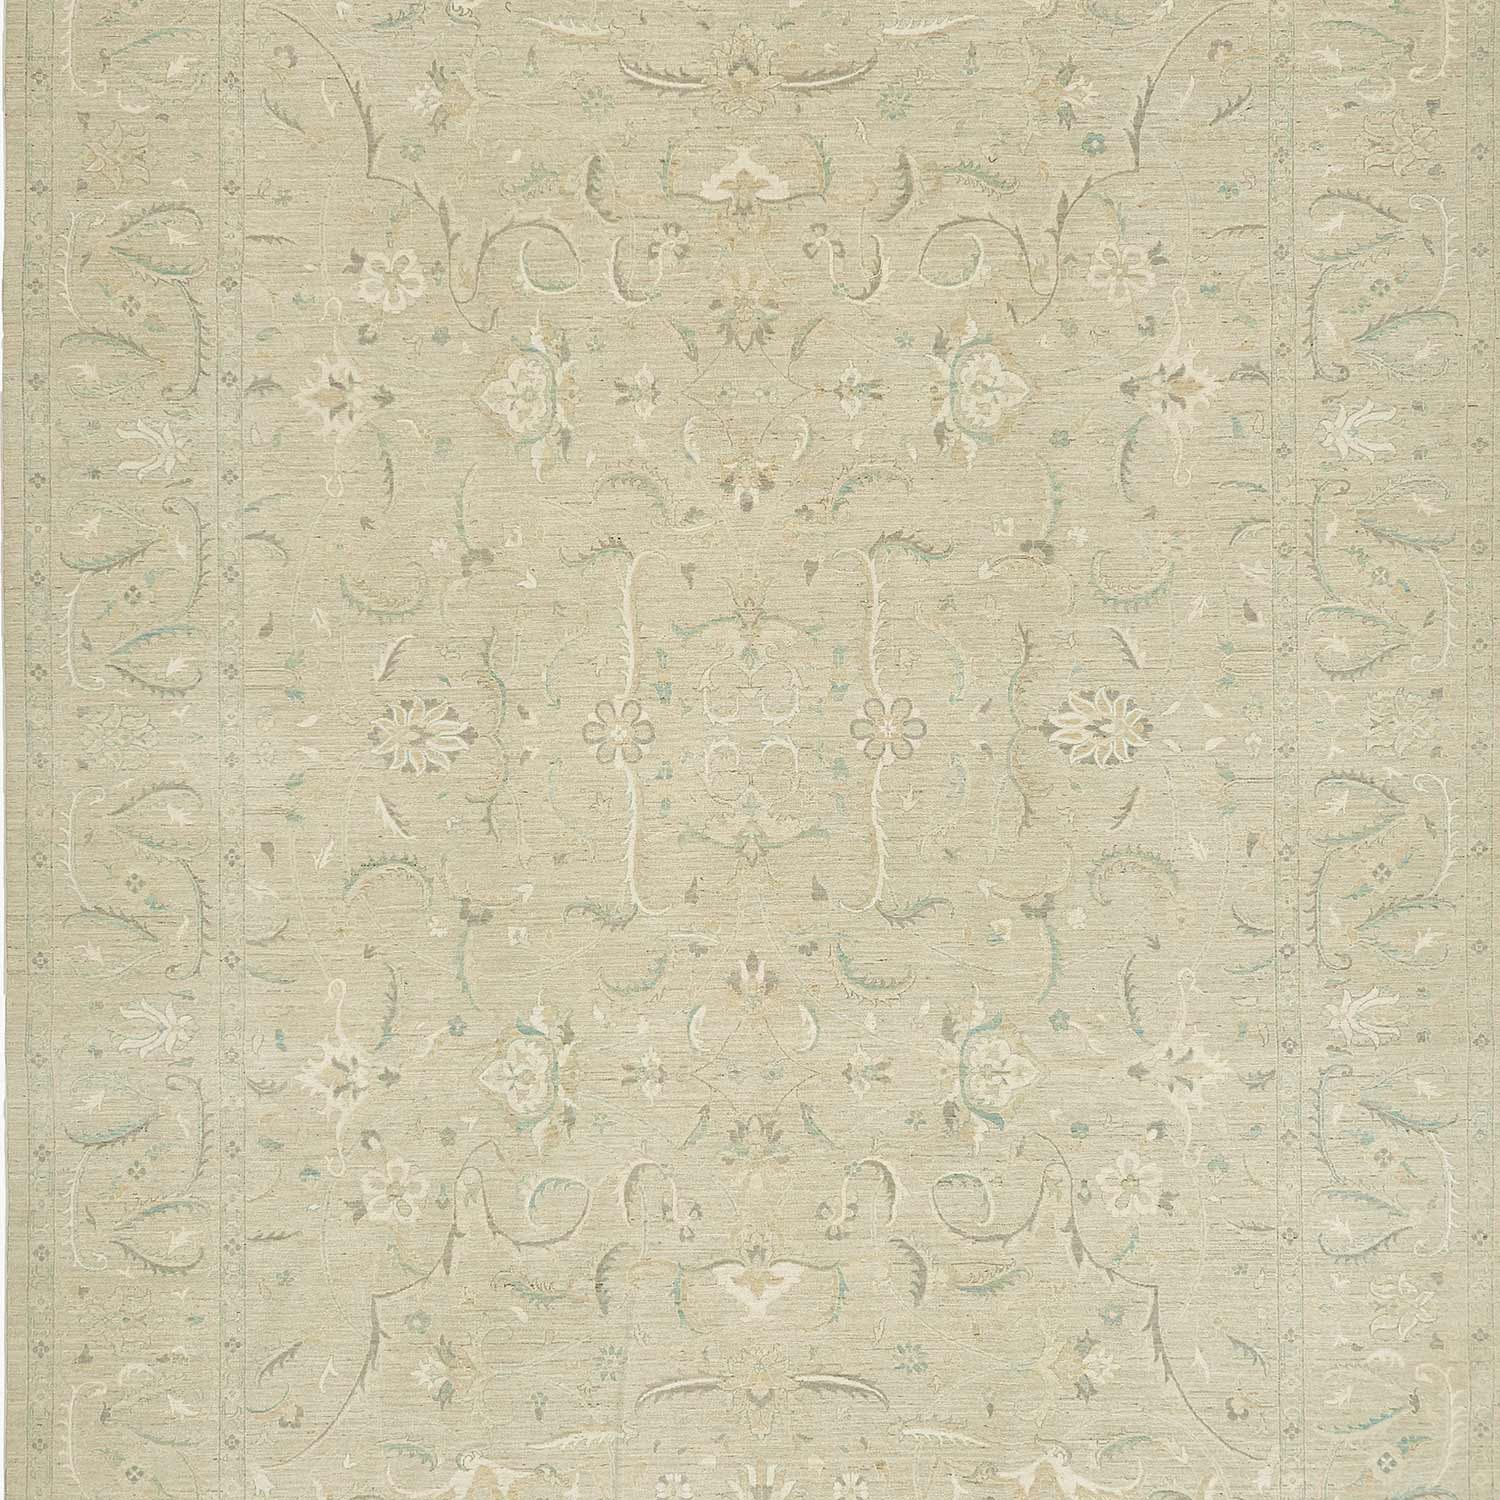 Subtle, elegant damask fabric with floral motifs in muted colors.